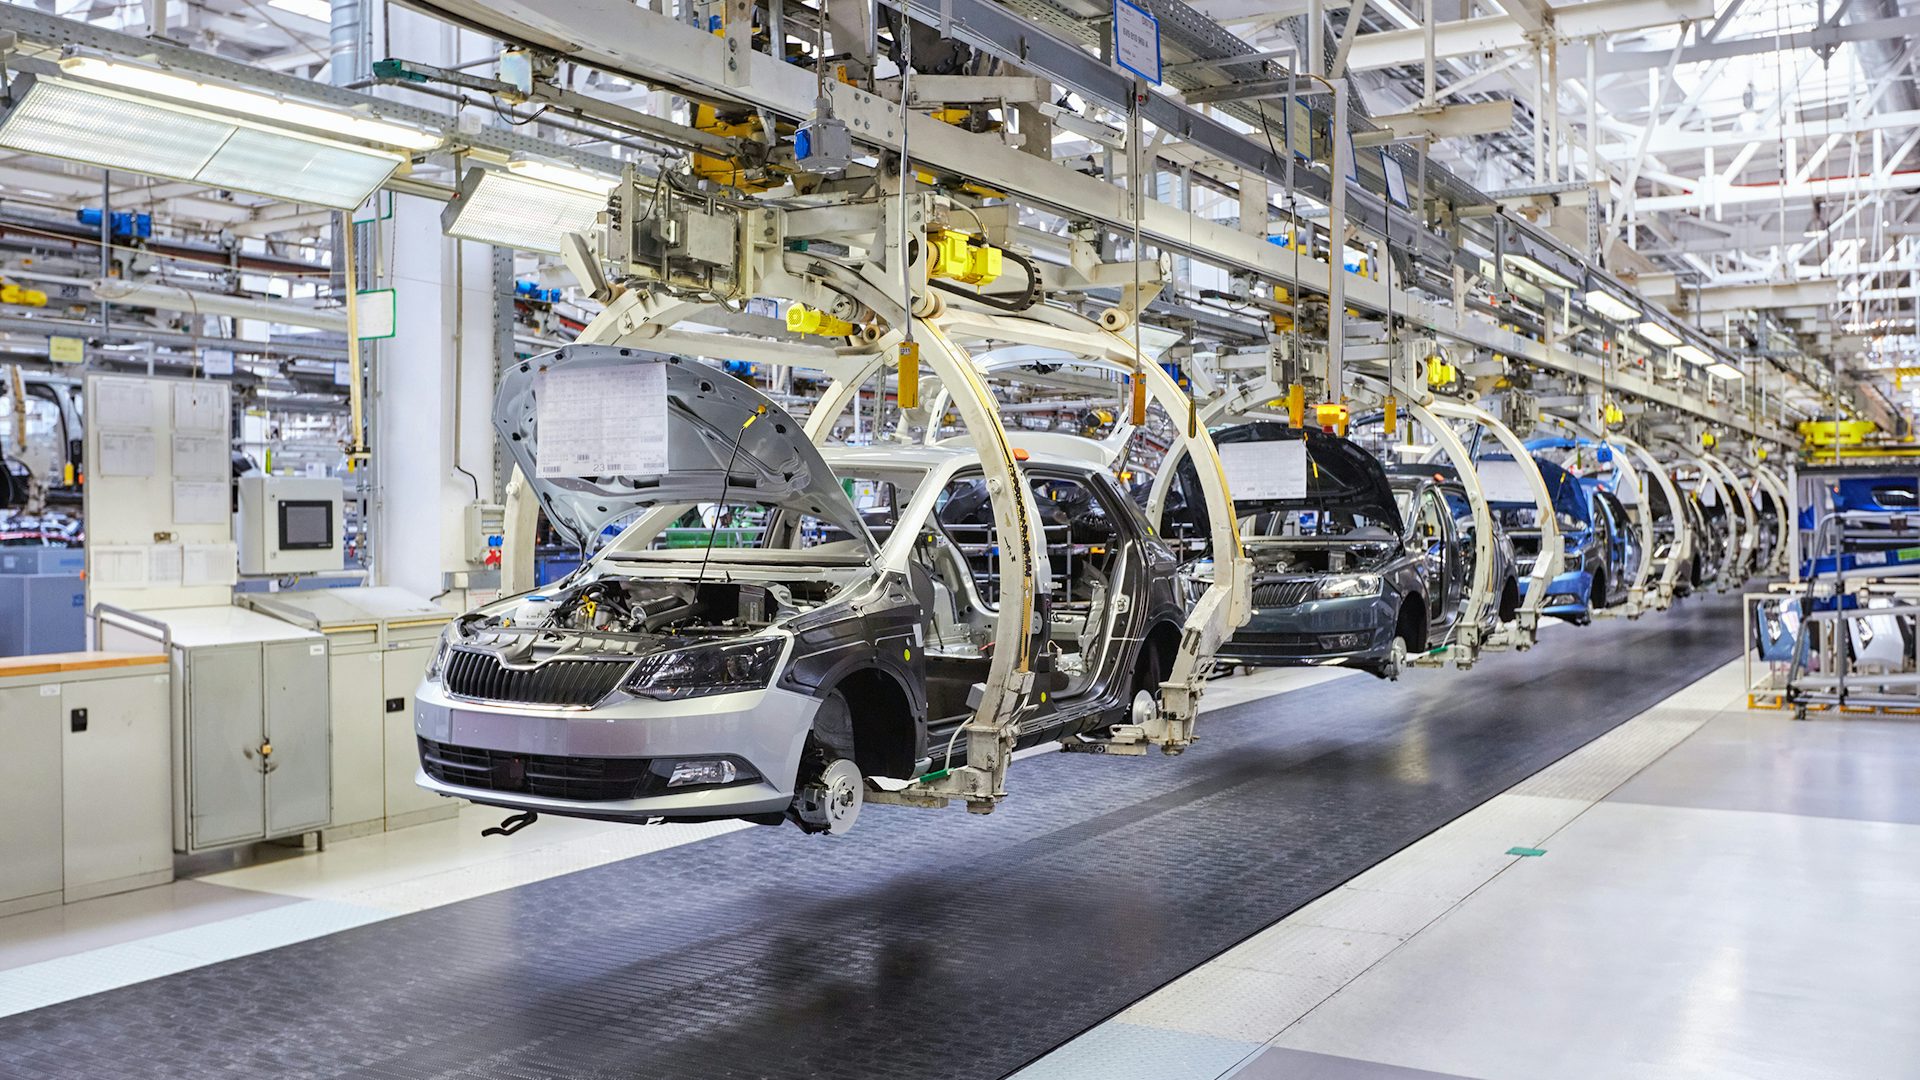 The final assembly line in an automobile factory.